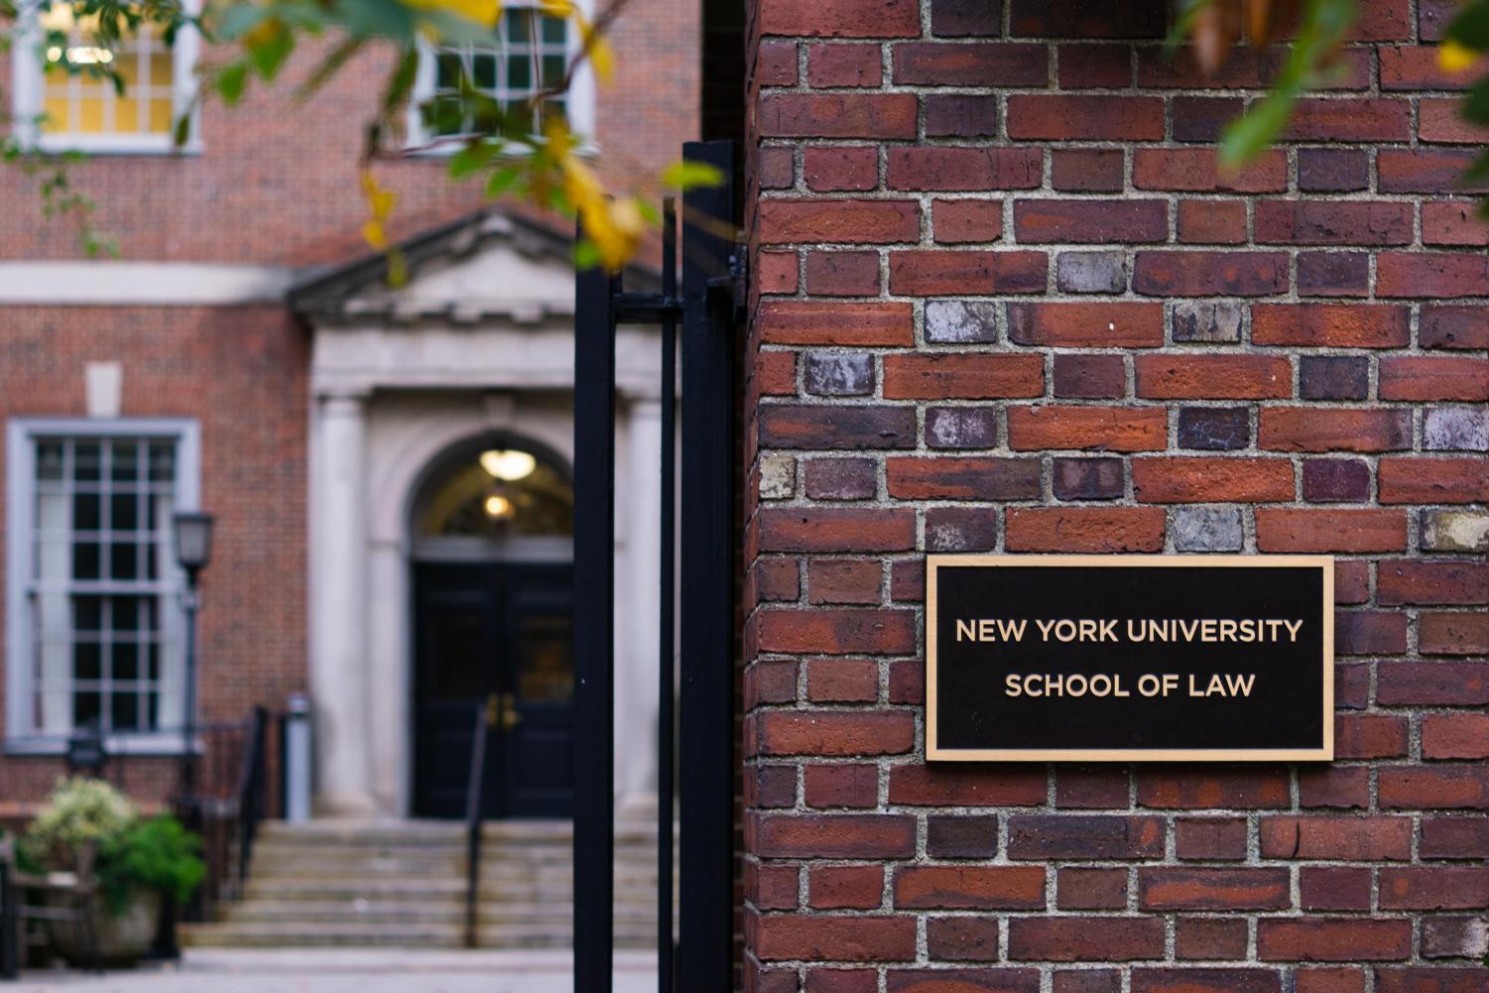 To the right there is a sign on a brick wall that reads, “New York University School of Law.” Behind that wall is the entrance to a brick building.